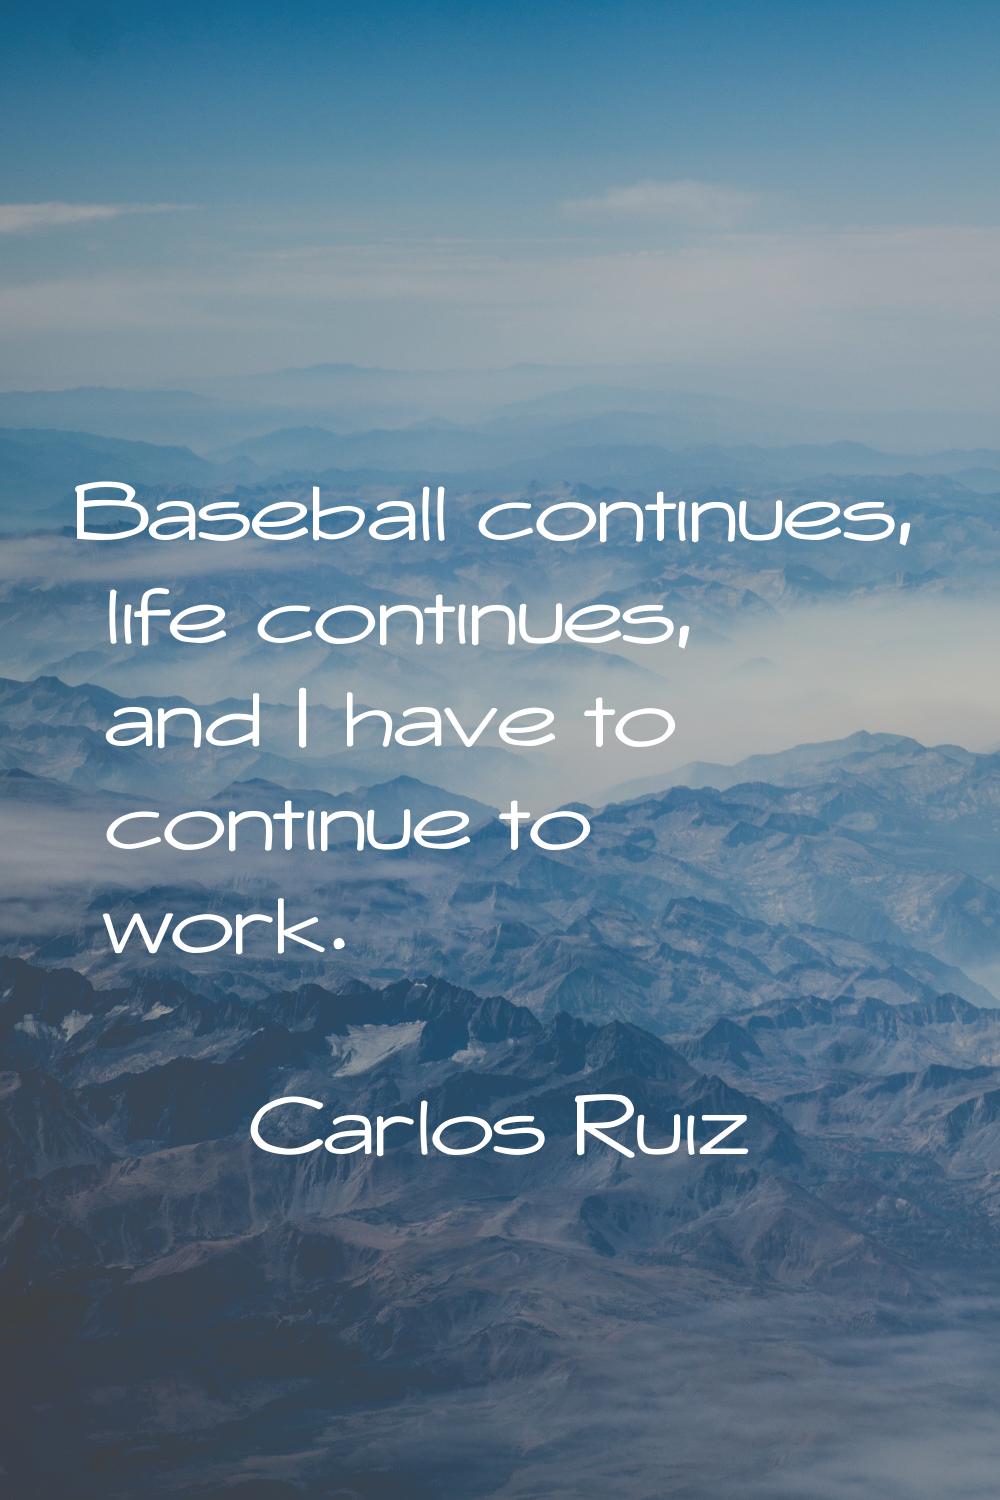 Baseball continues, life continues, and I have to continue to work.